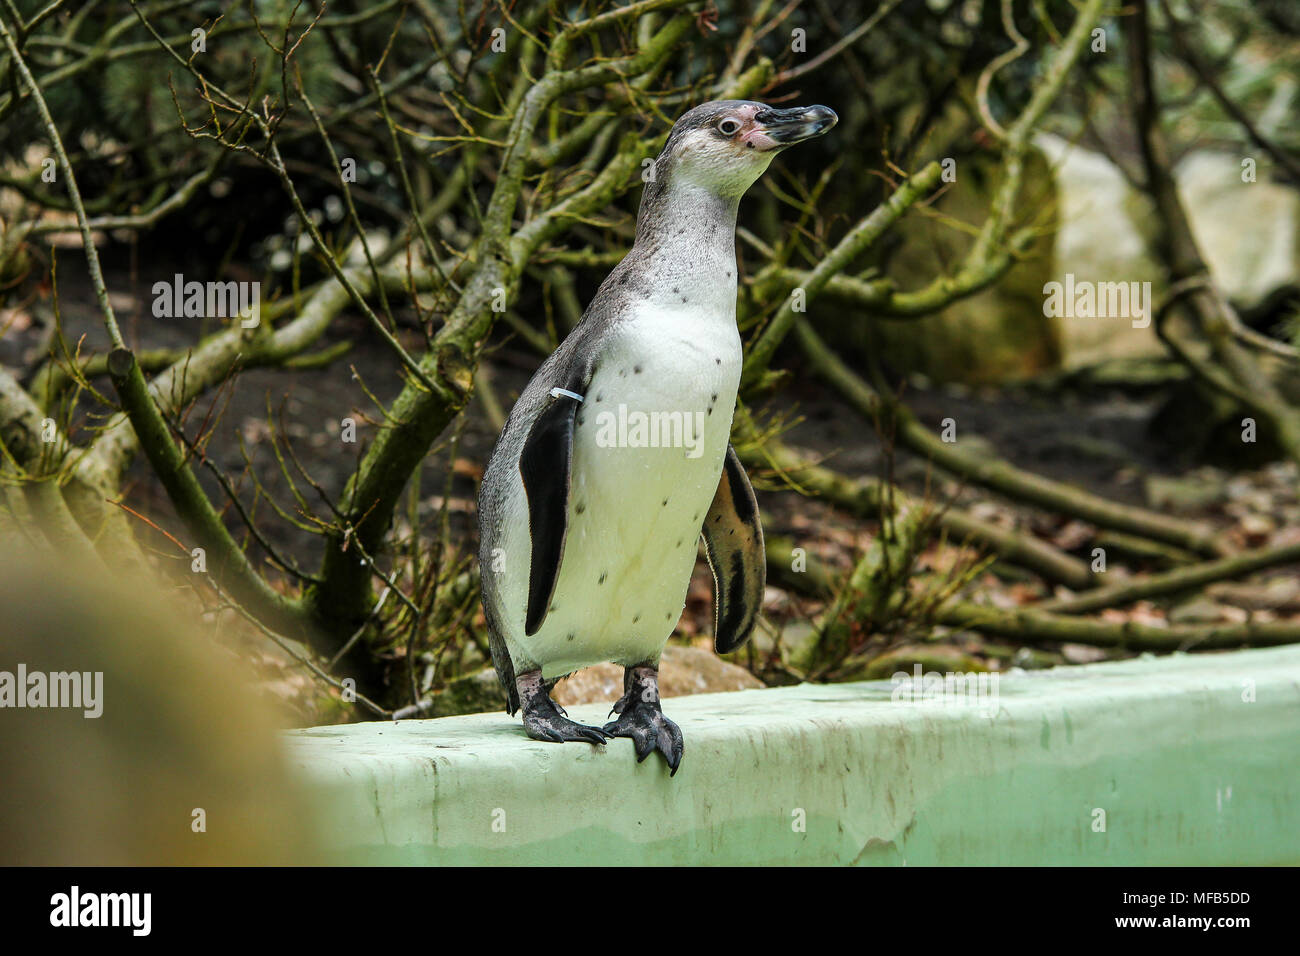 A picture of the penguin standing by the pool in the ZOO. Stock Photo